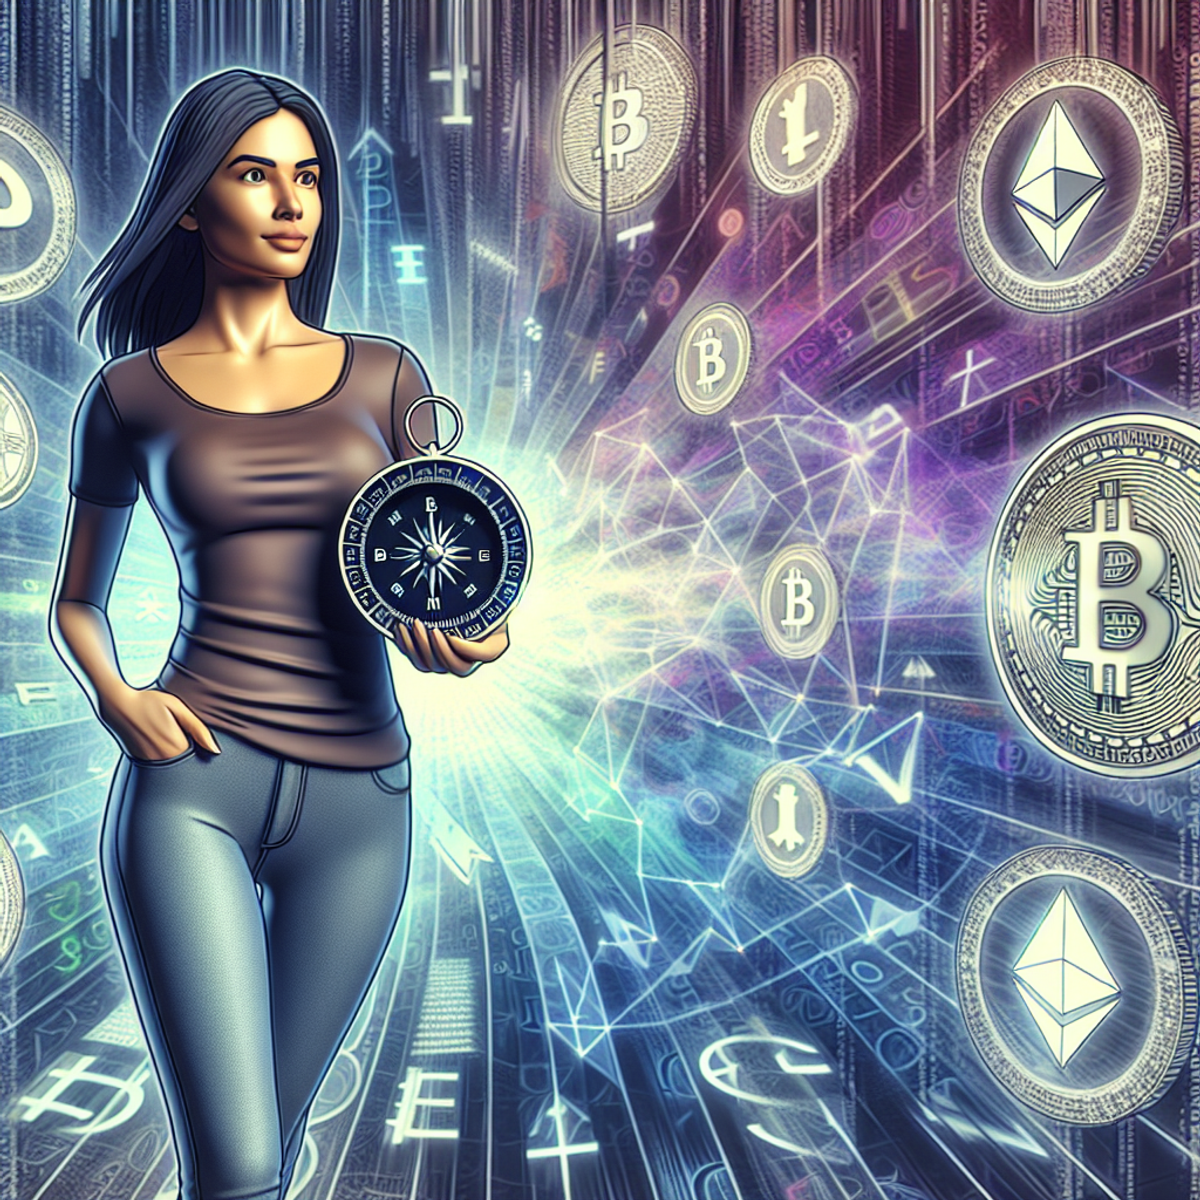 Alt text: A confident Hispanic woman stands on a path of digital currency symbols, holding a digital compass with abstract digital data in the backgro